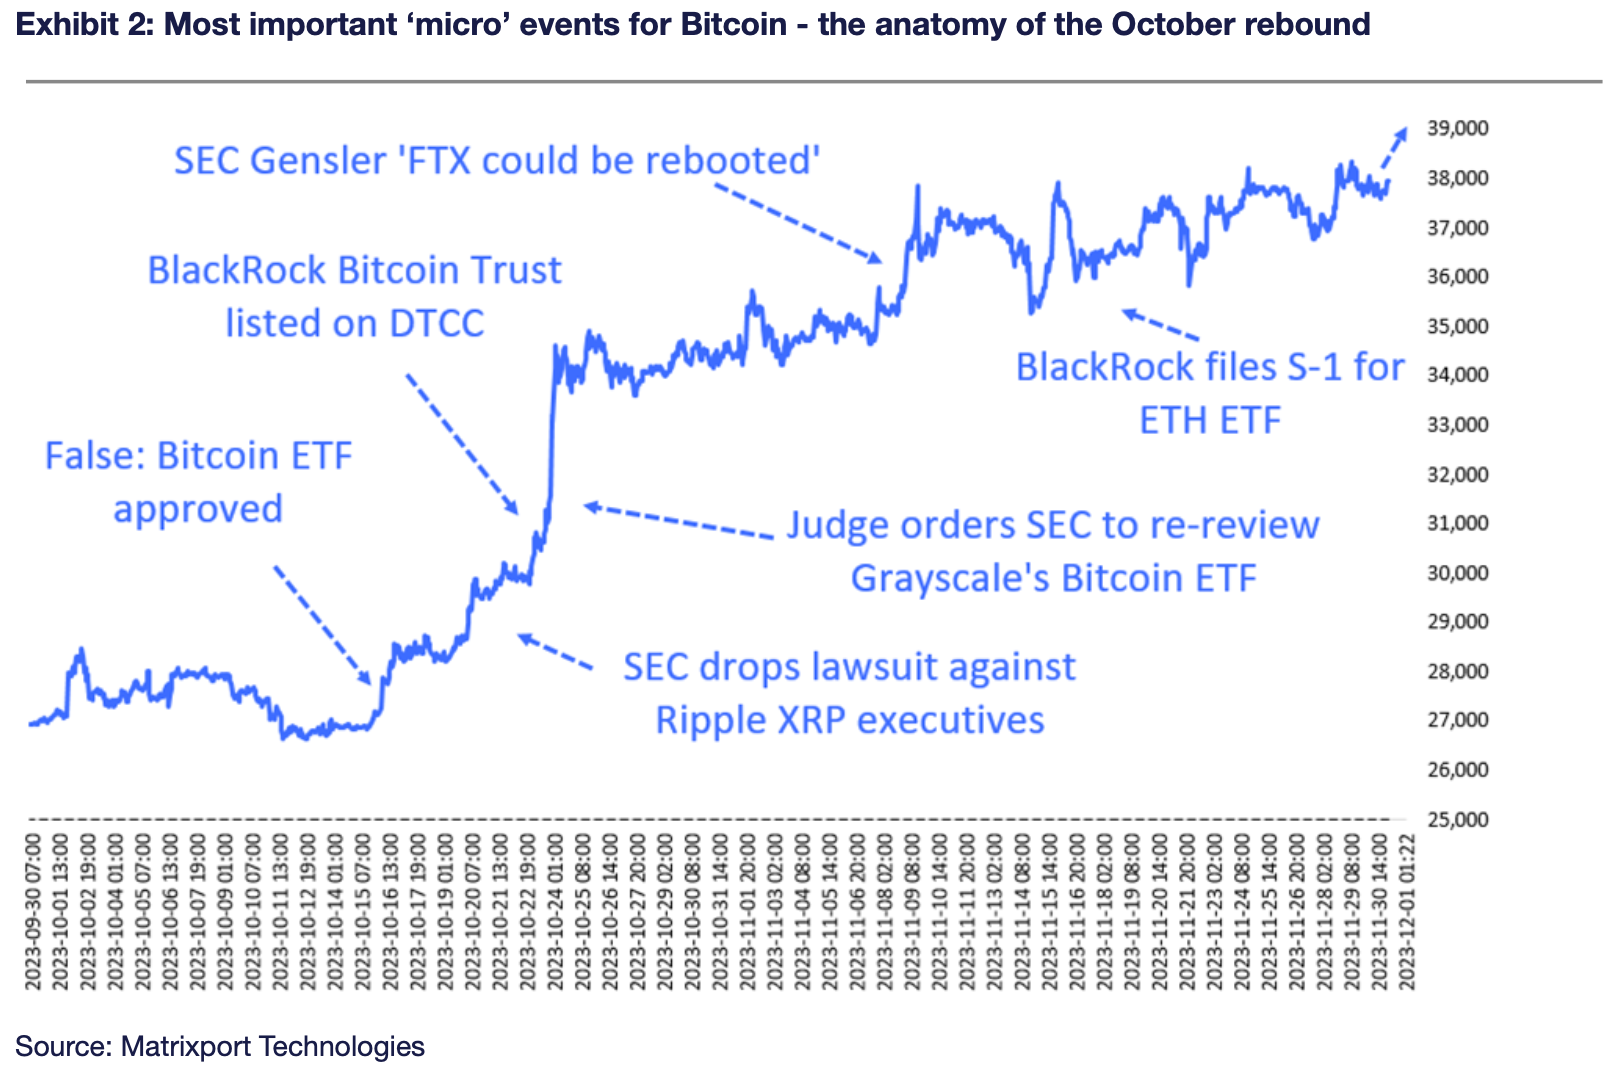 Exhibit 2: Most important ‘micro’ events for Bitcoin - the anatomy of the October rebound